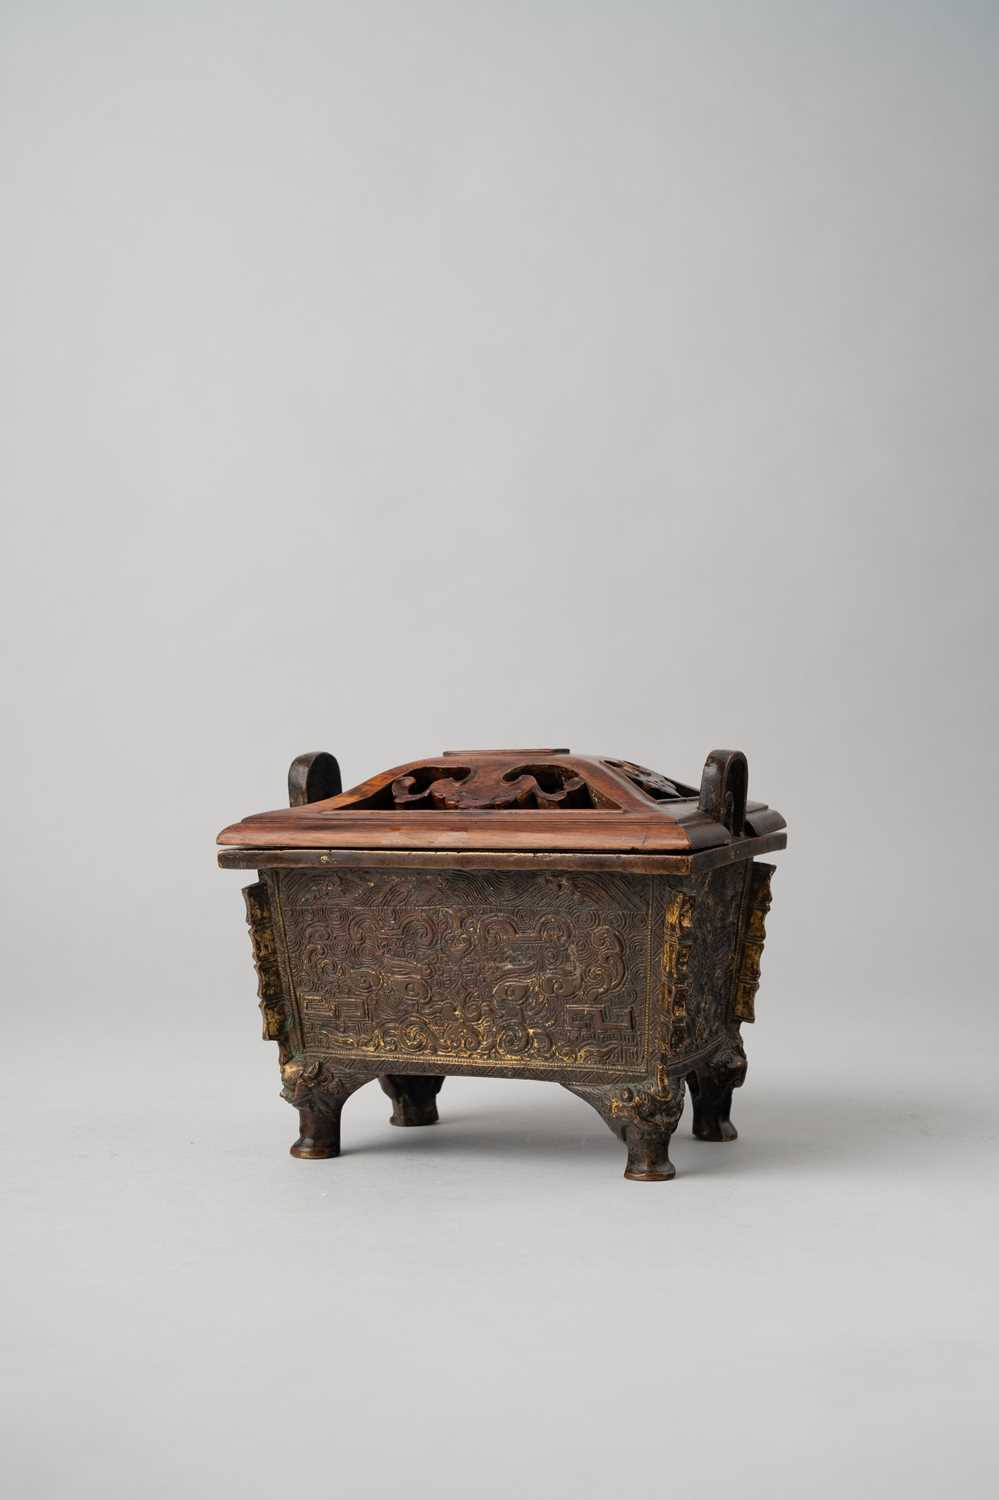 A CHINESE ARCHAISTIC GILT-BRONZE INCENSE BURNER LATE MING DYNASTY The rectangular body with two loop